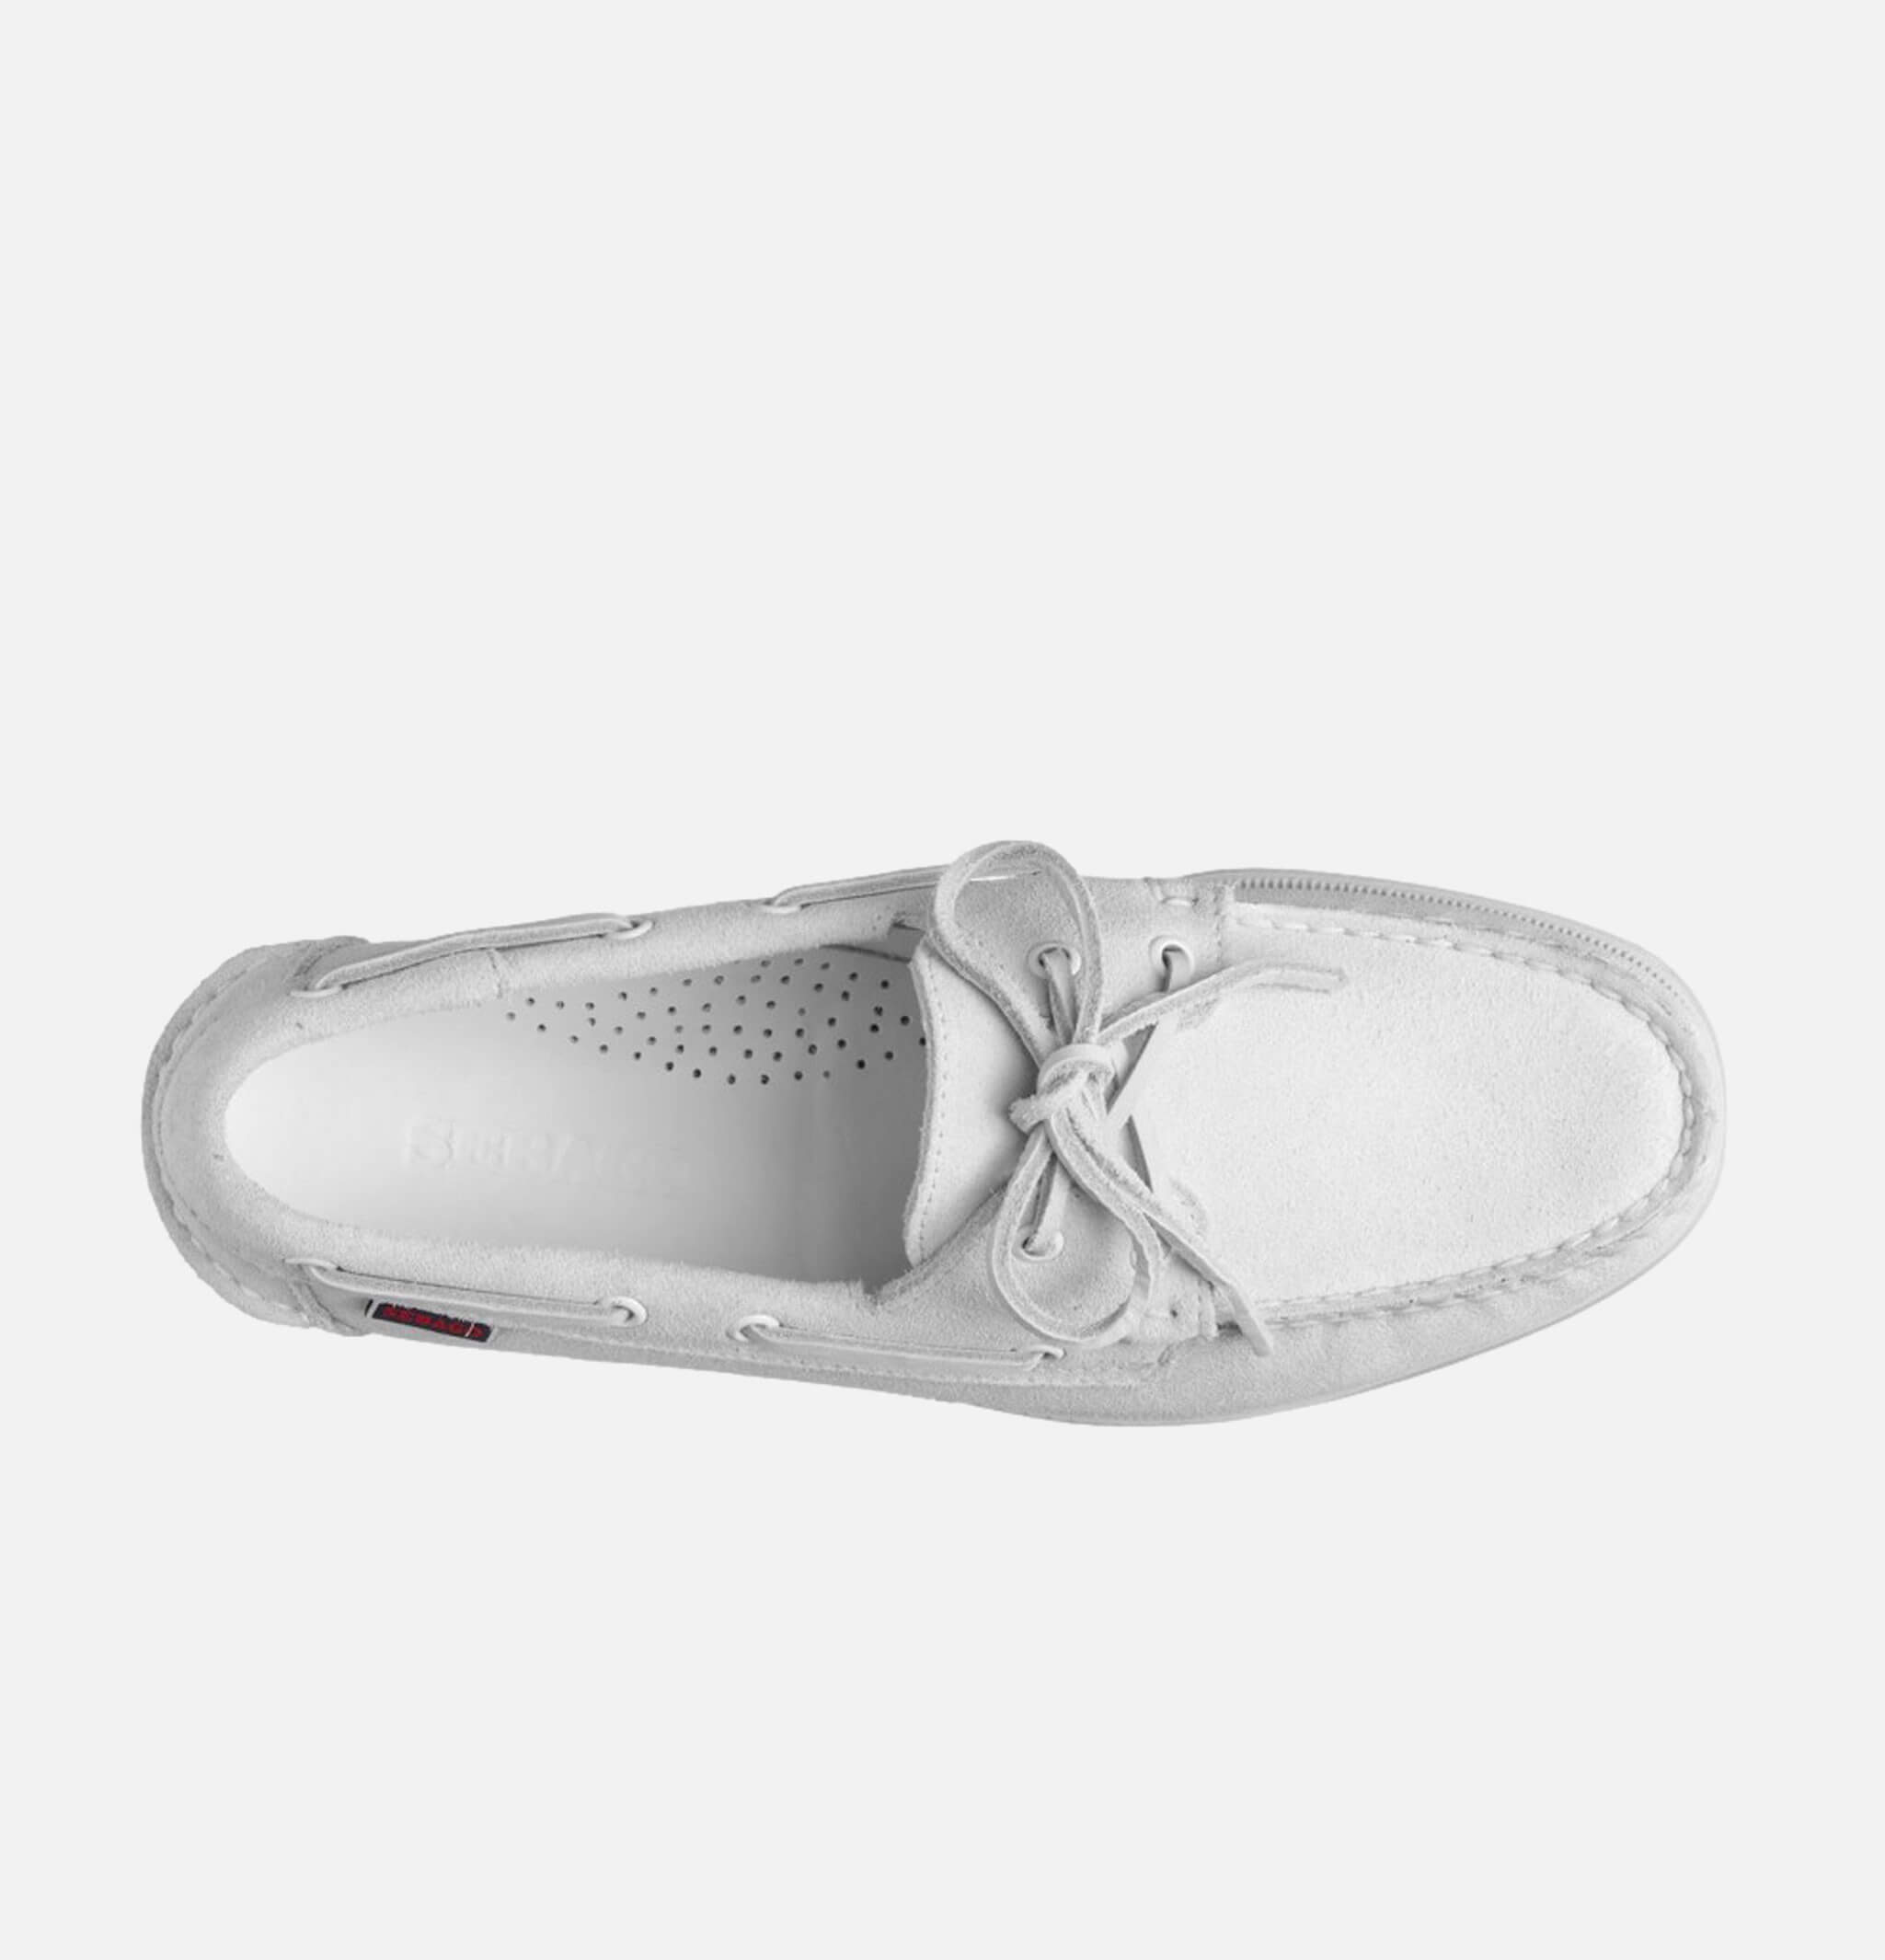 Docksides White Suede Shoes